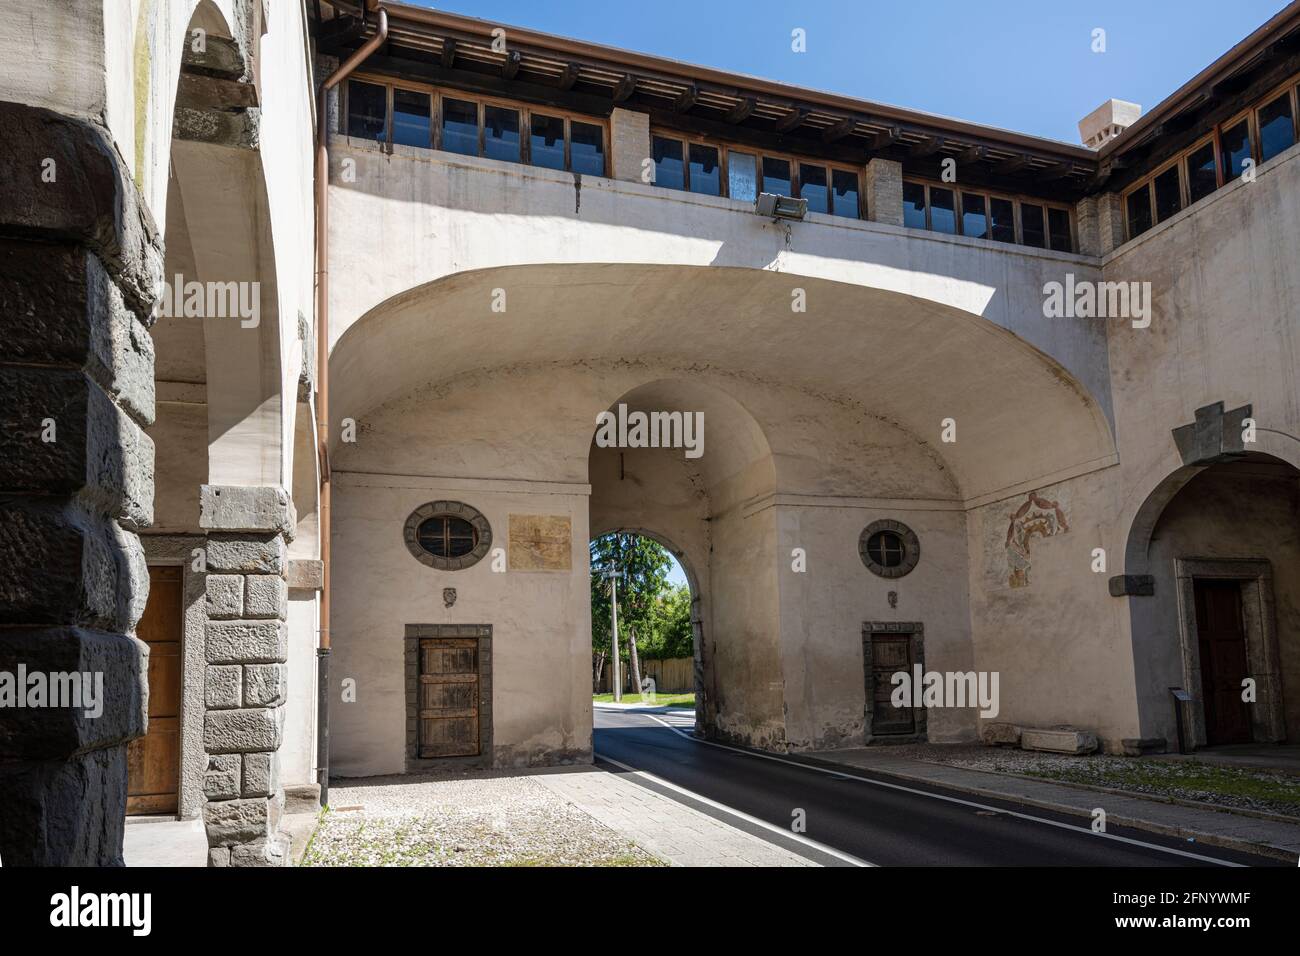 Palmanova, Italy. May 18, 2021.  View of the structure of the ancient Aquileia city gate. Stock Photo